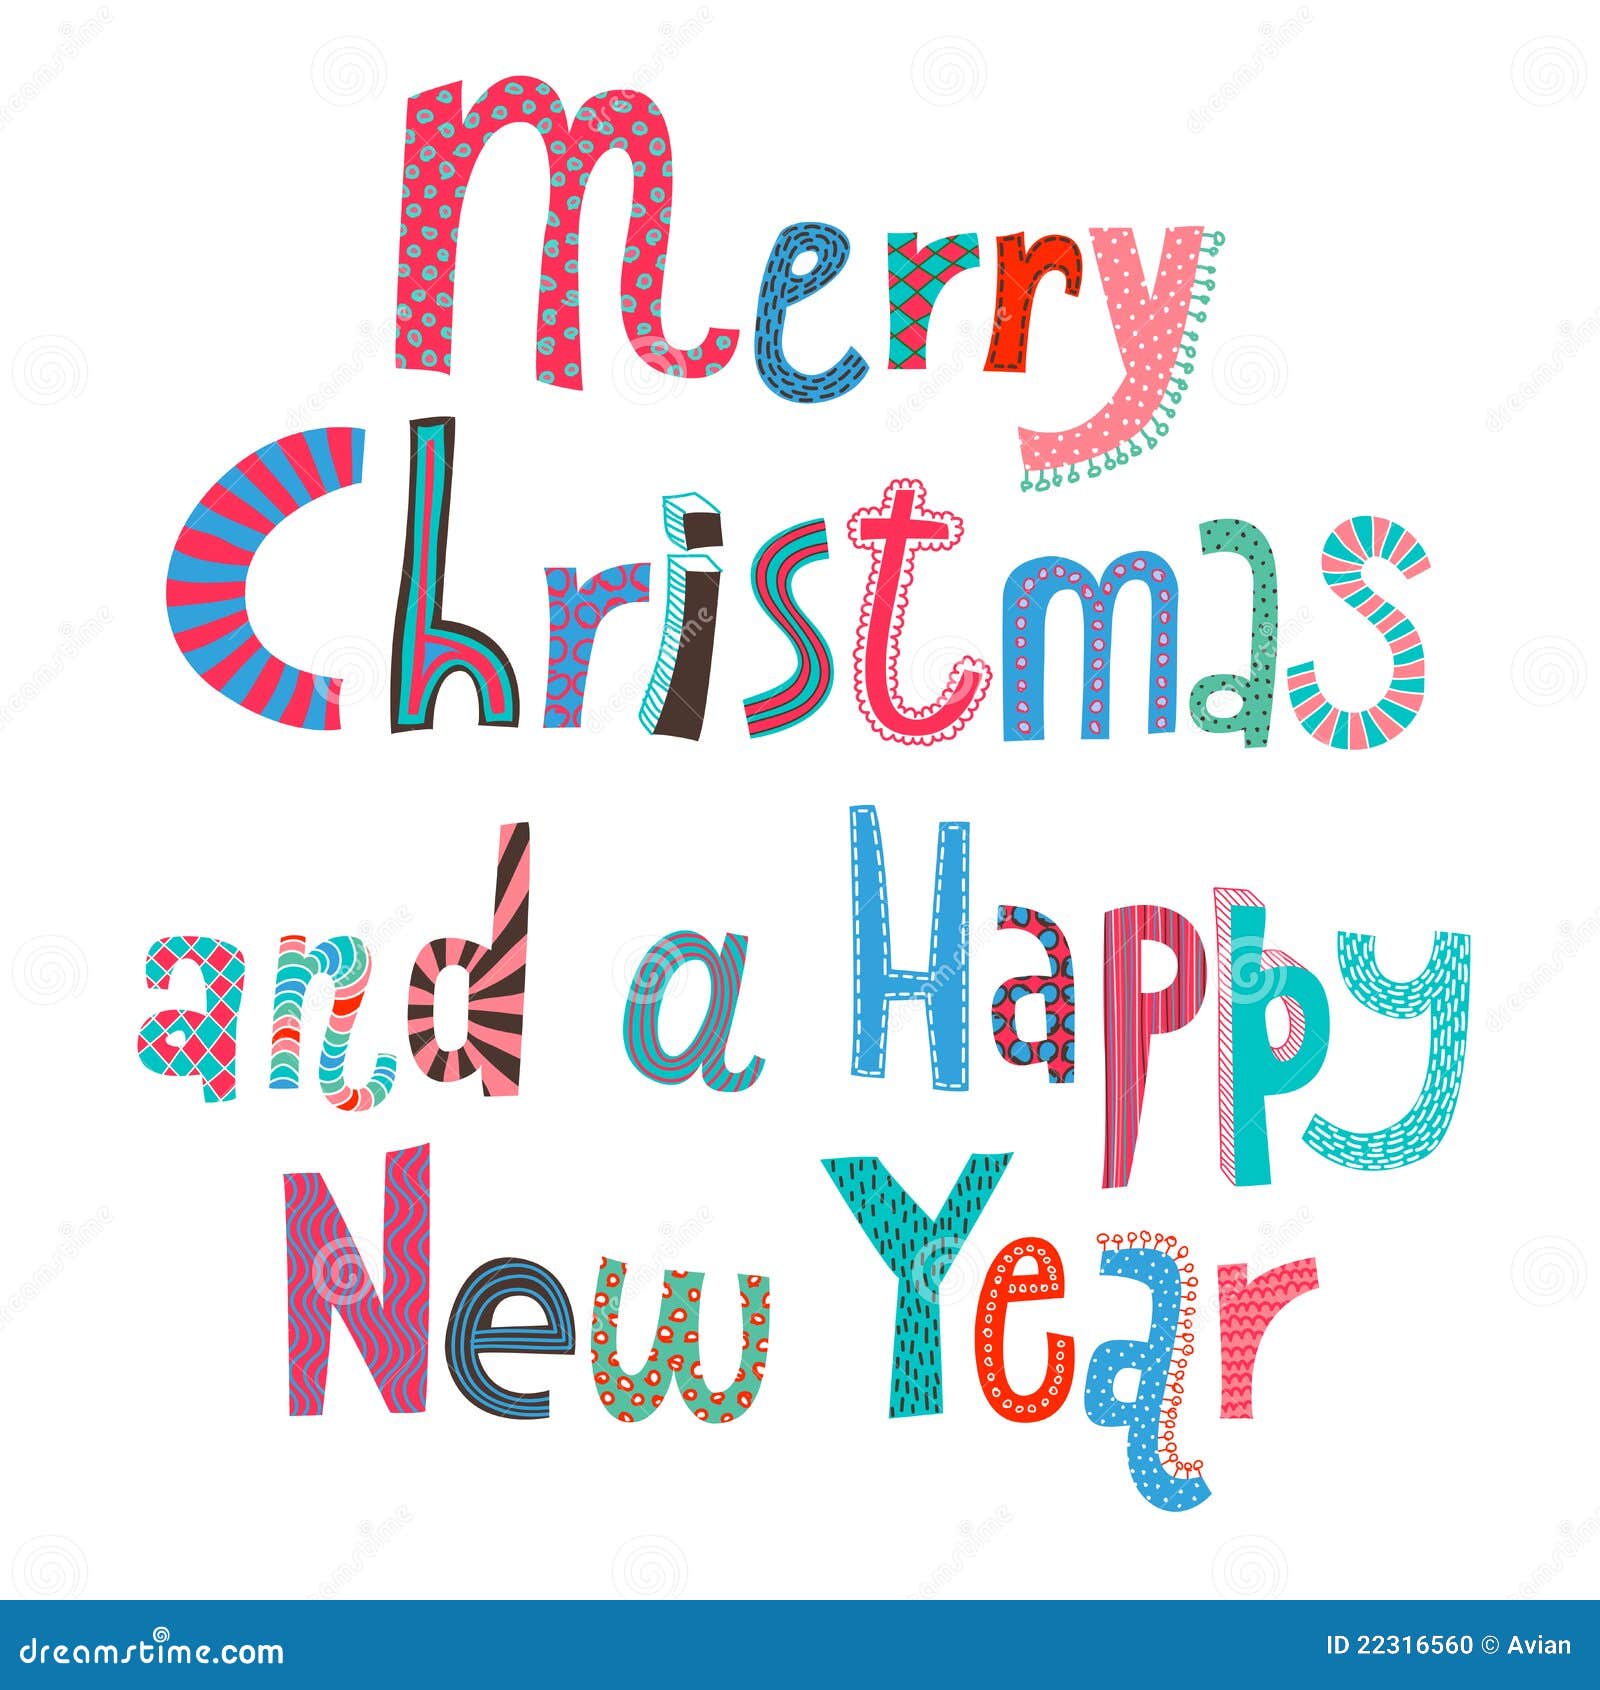 clipart merry christmas and happy new year - photo #40